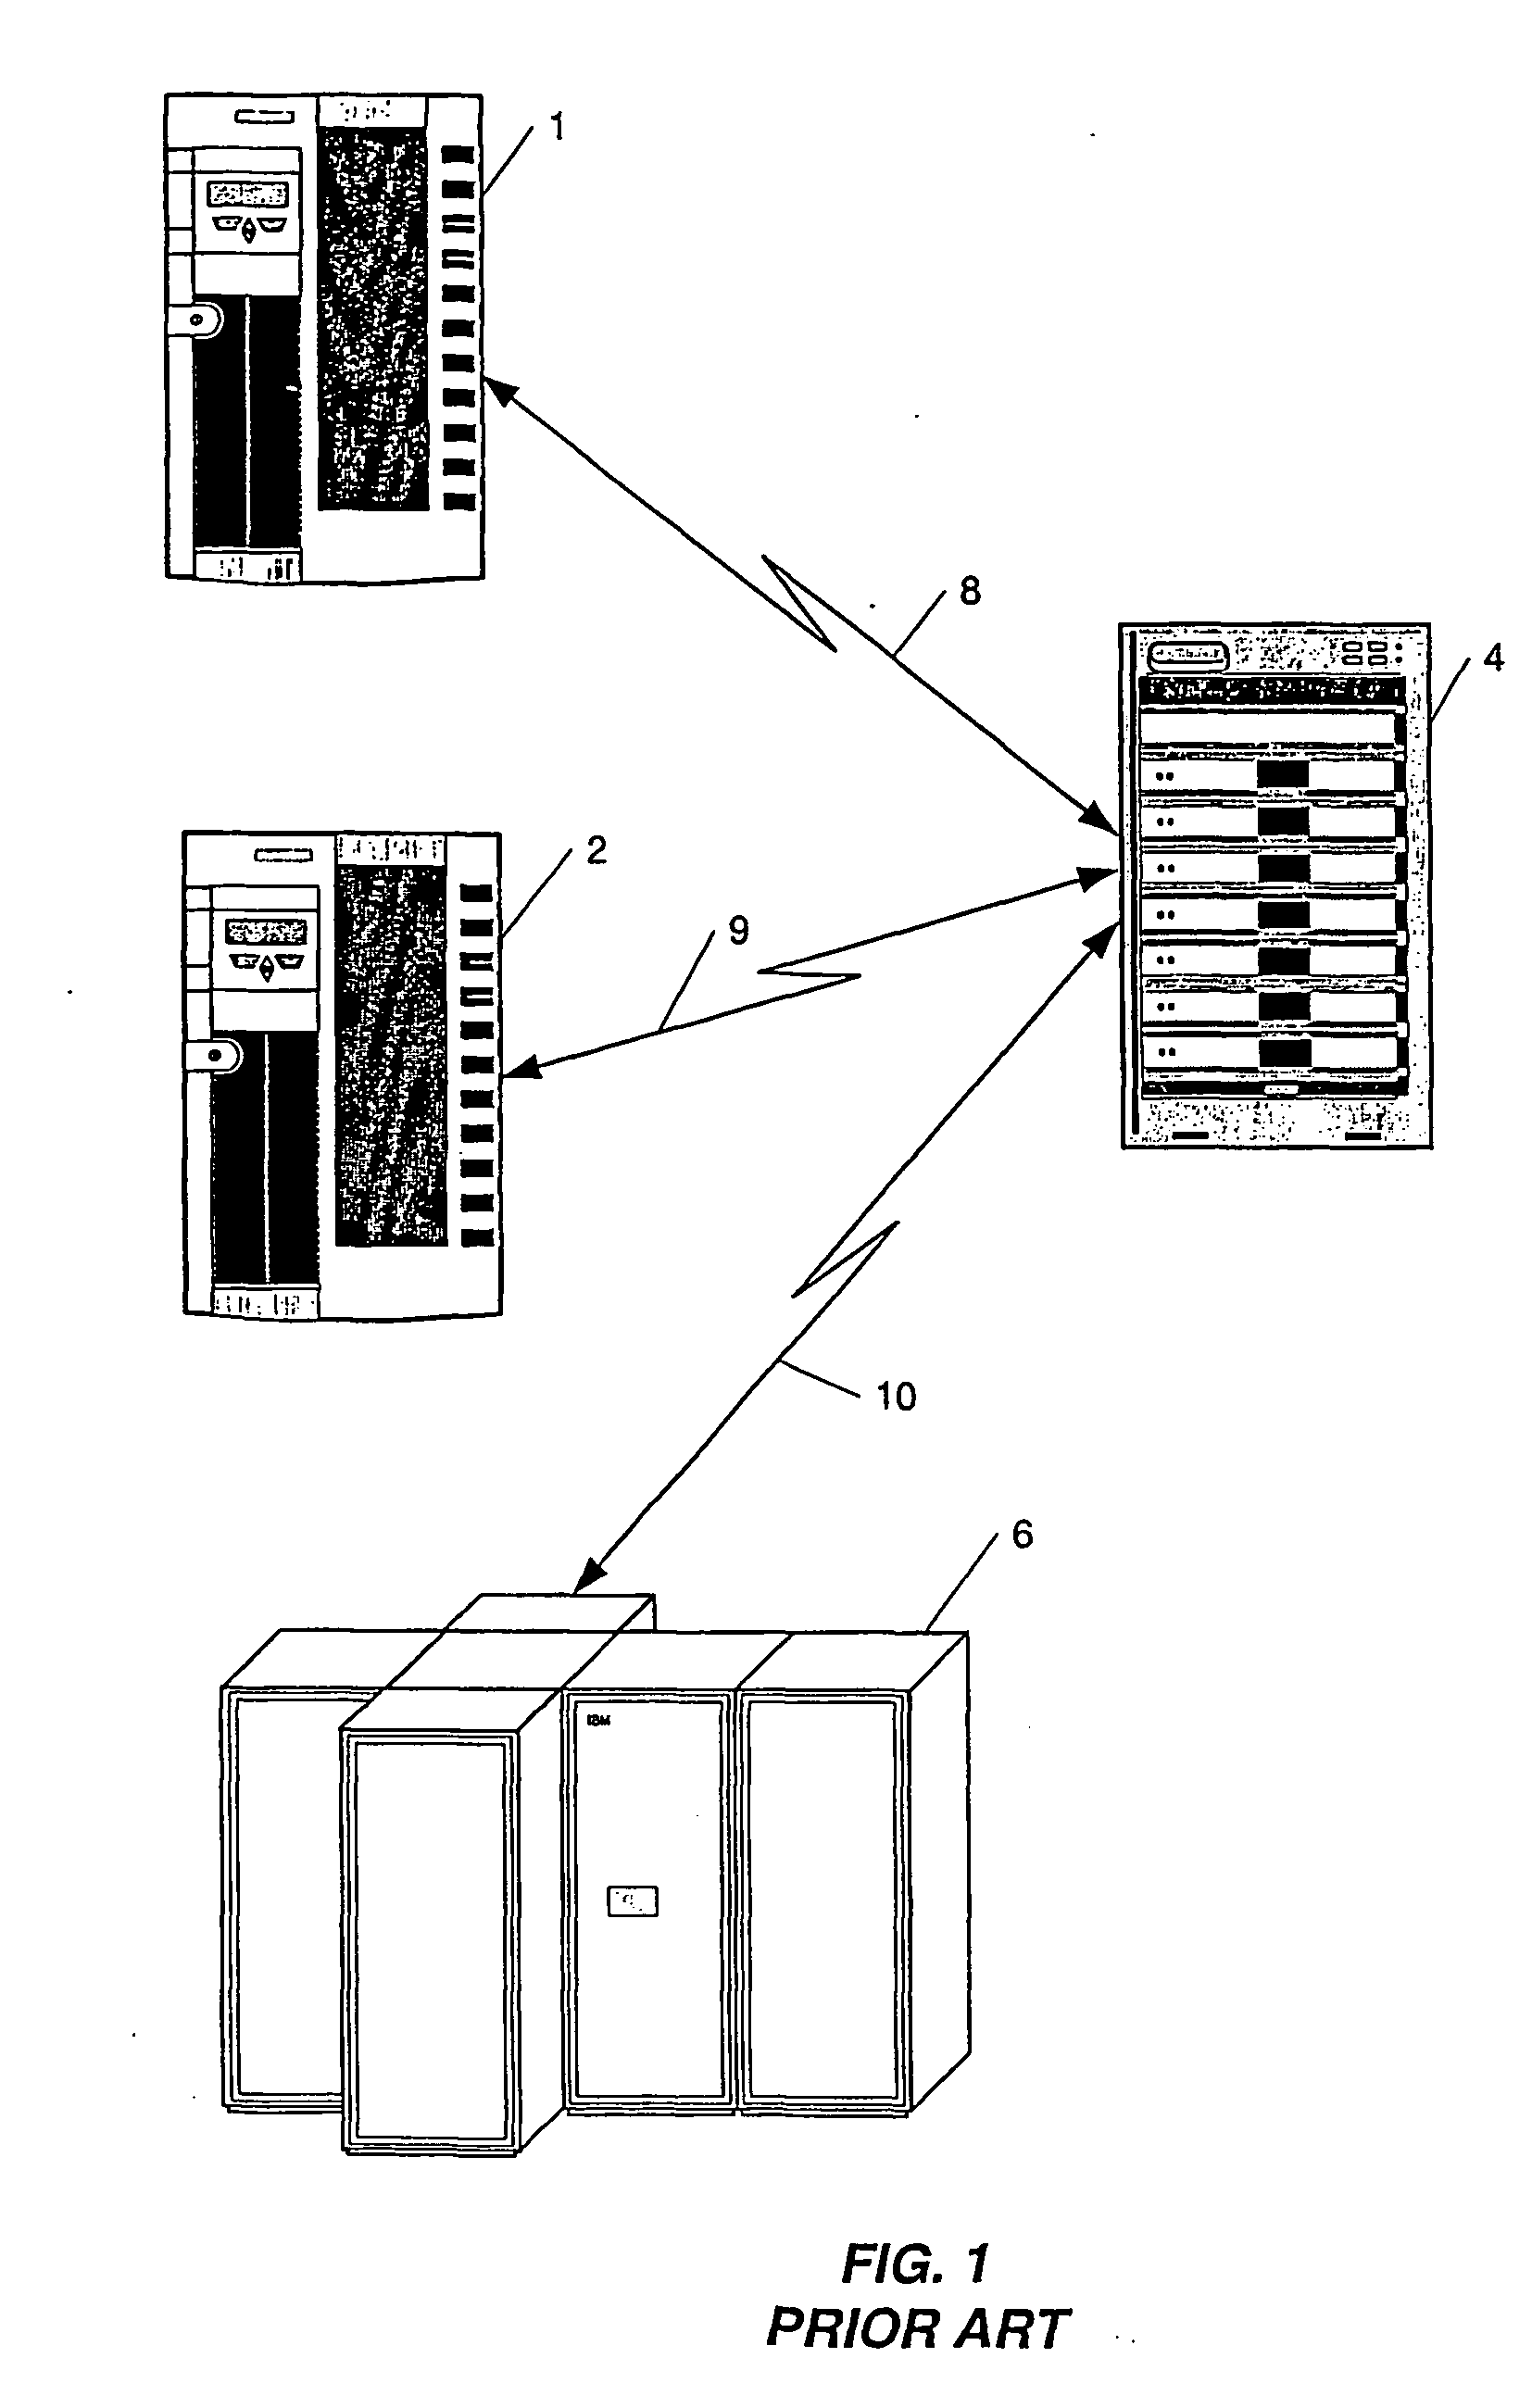 Method and apparatus for unified storage of data for storage area network systems and network attached storage systems